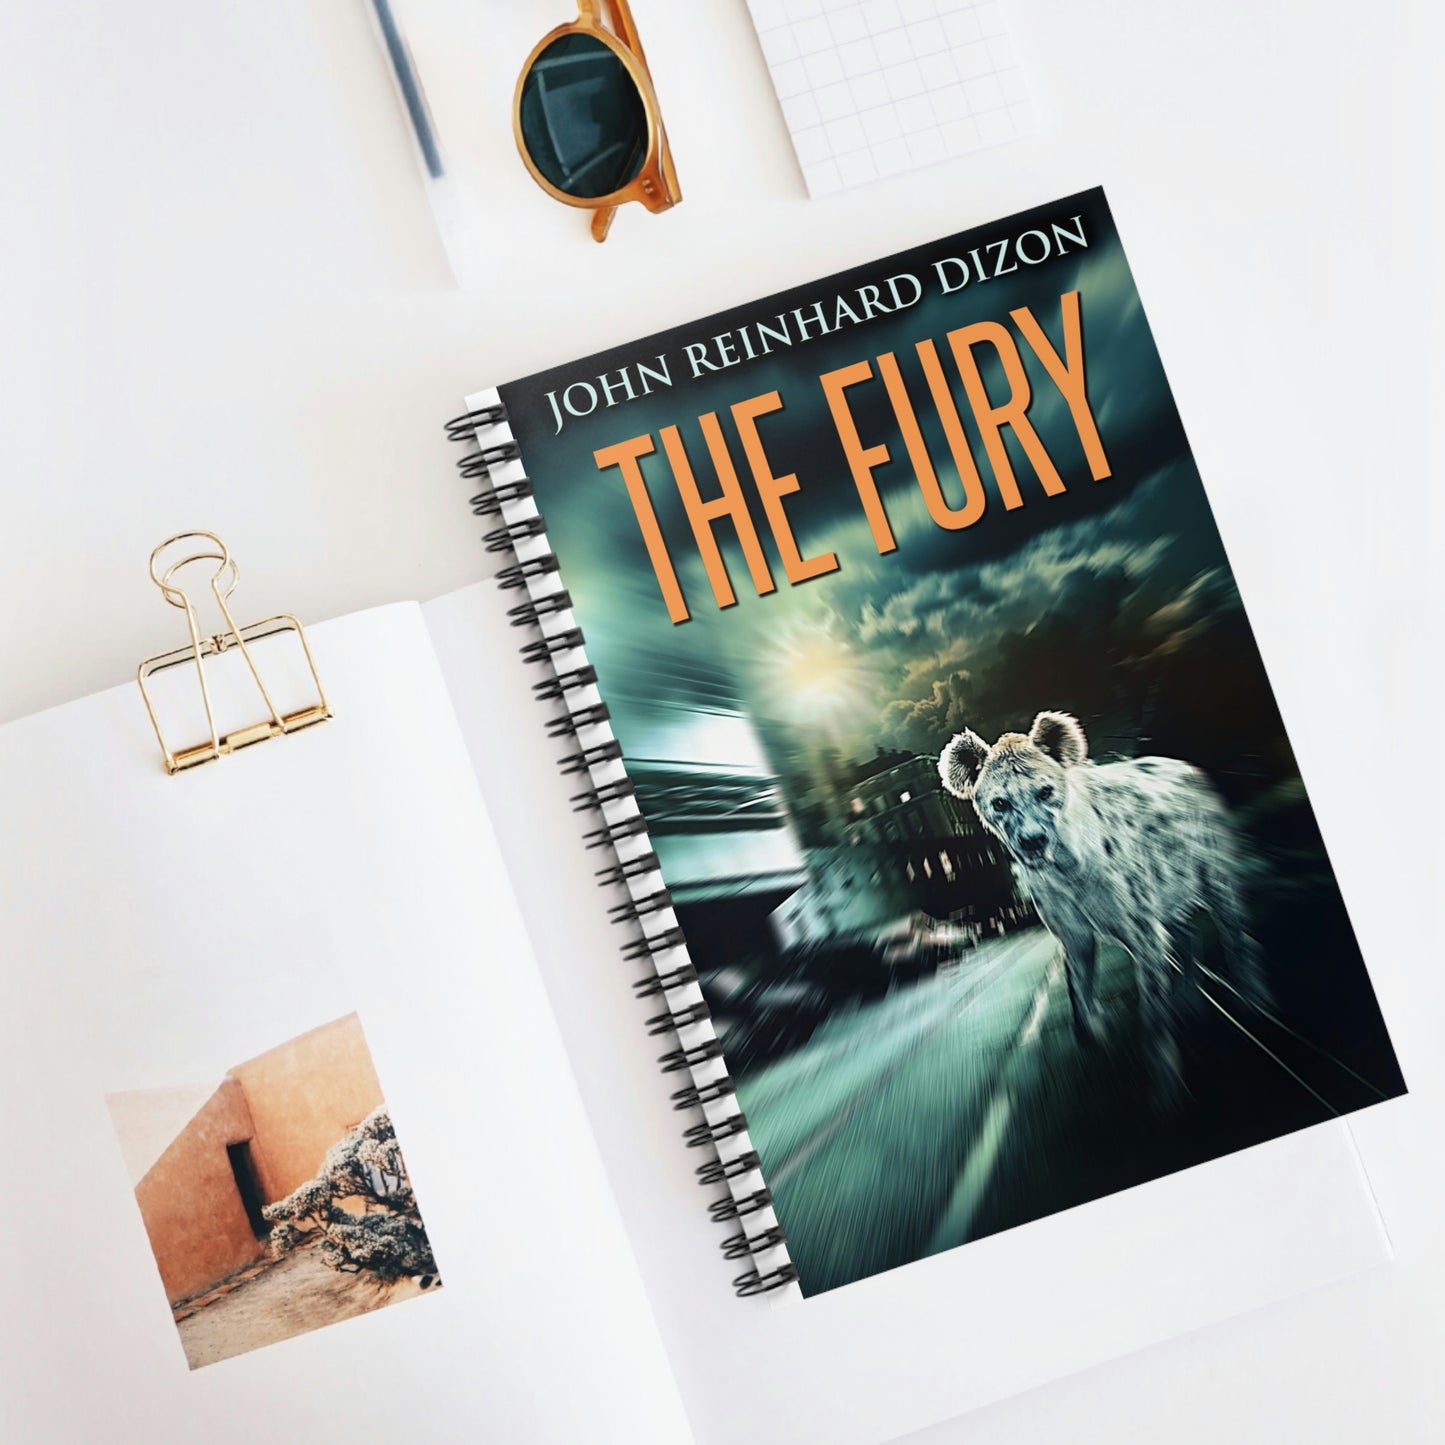 The Fury - Spiral Notebook